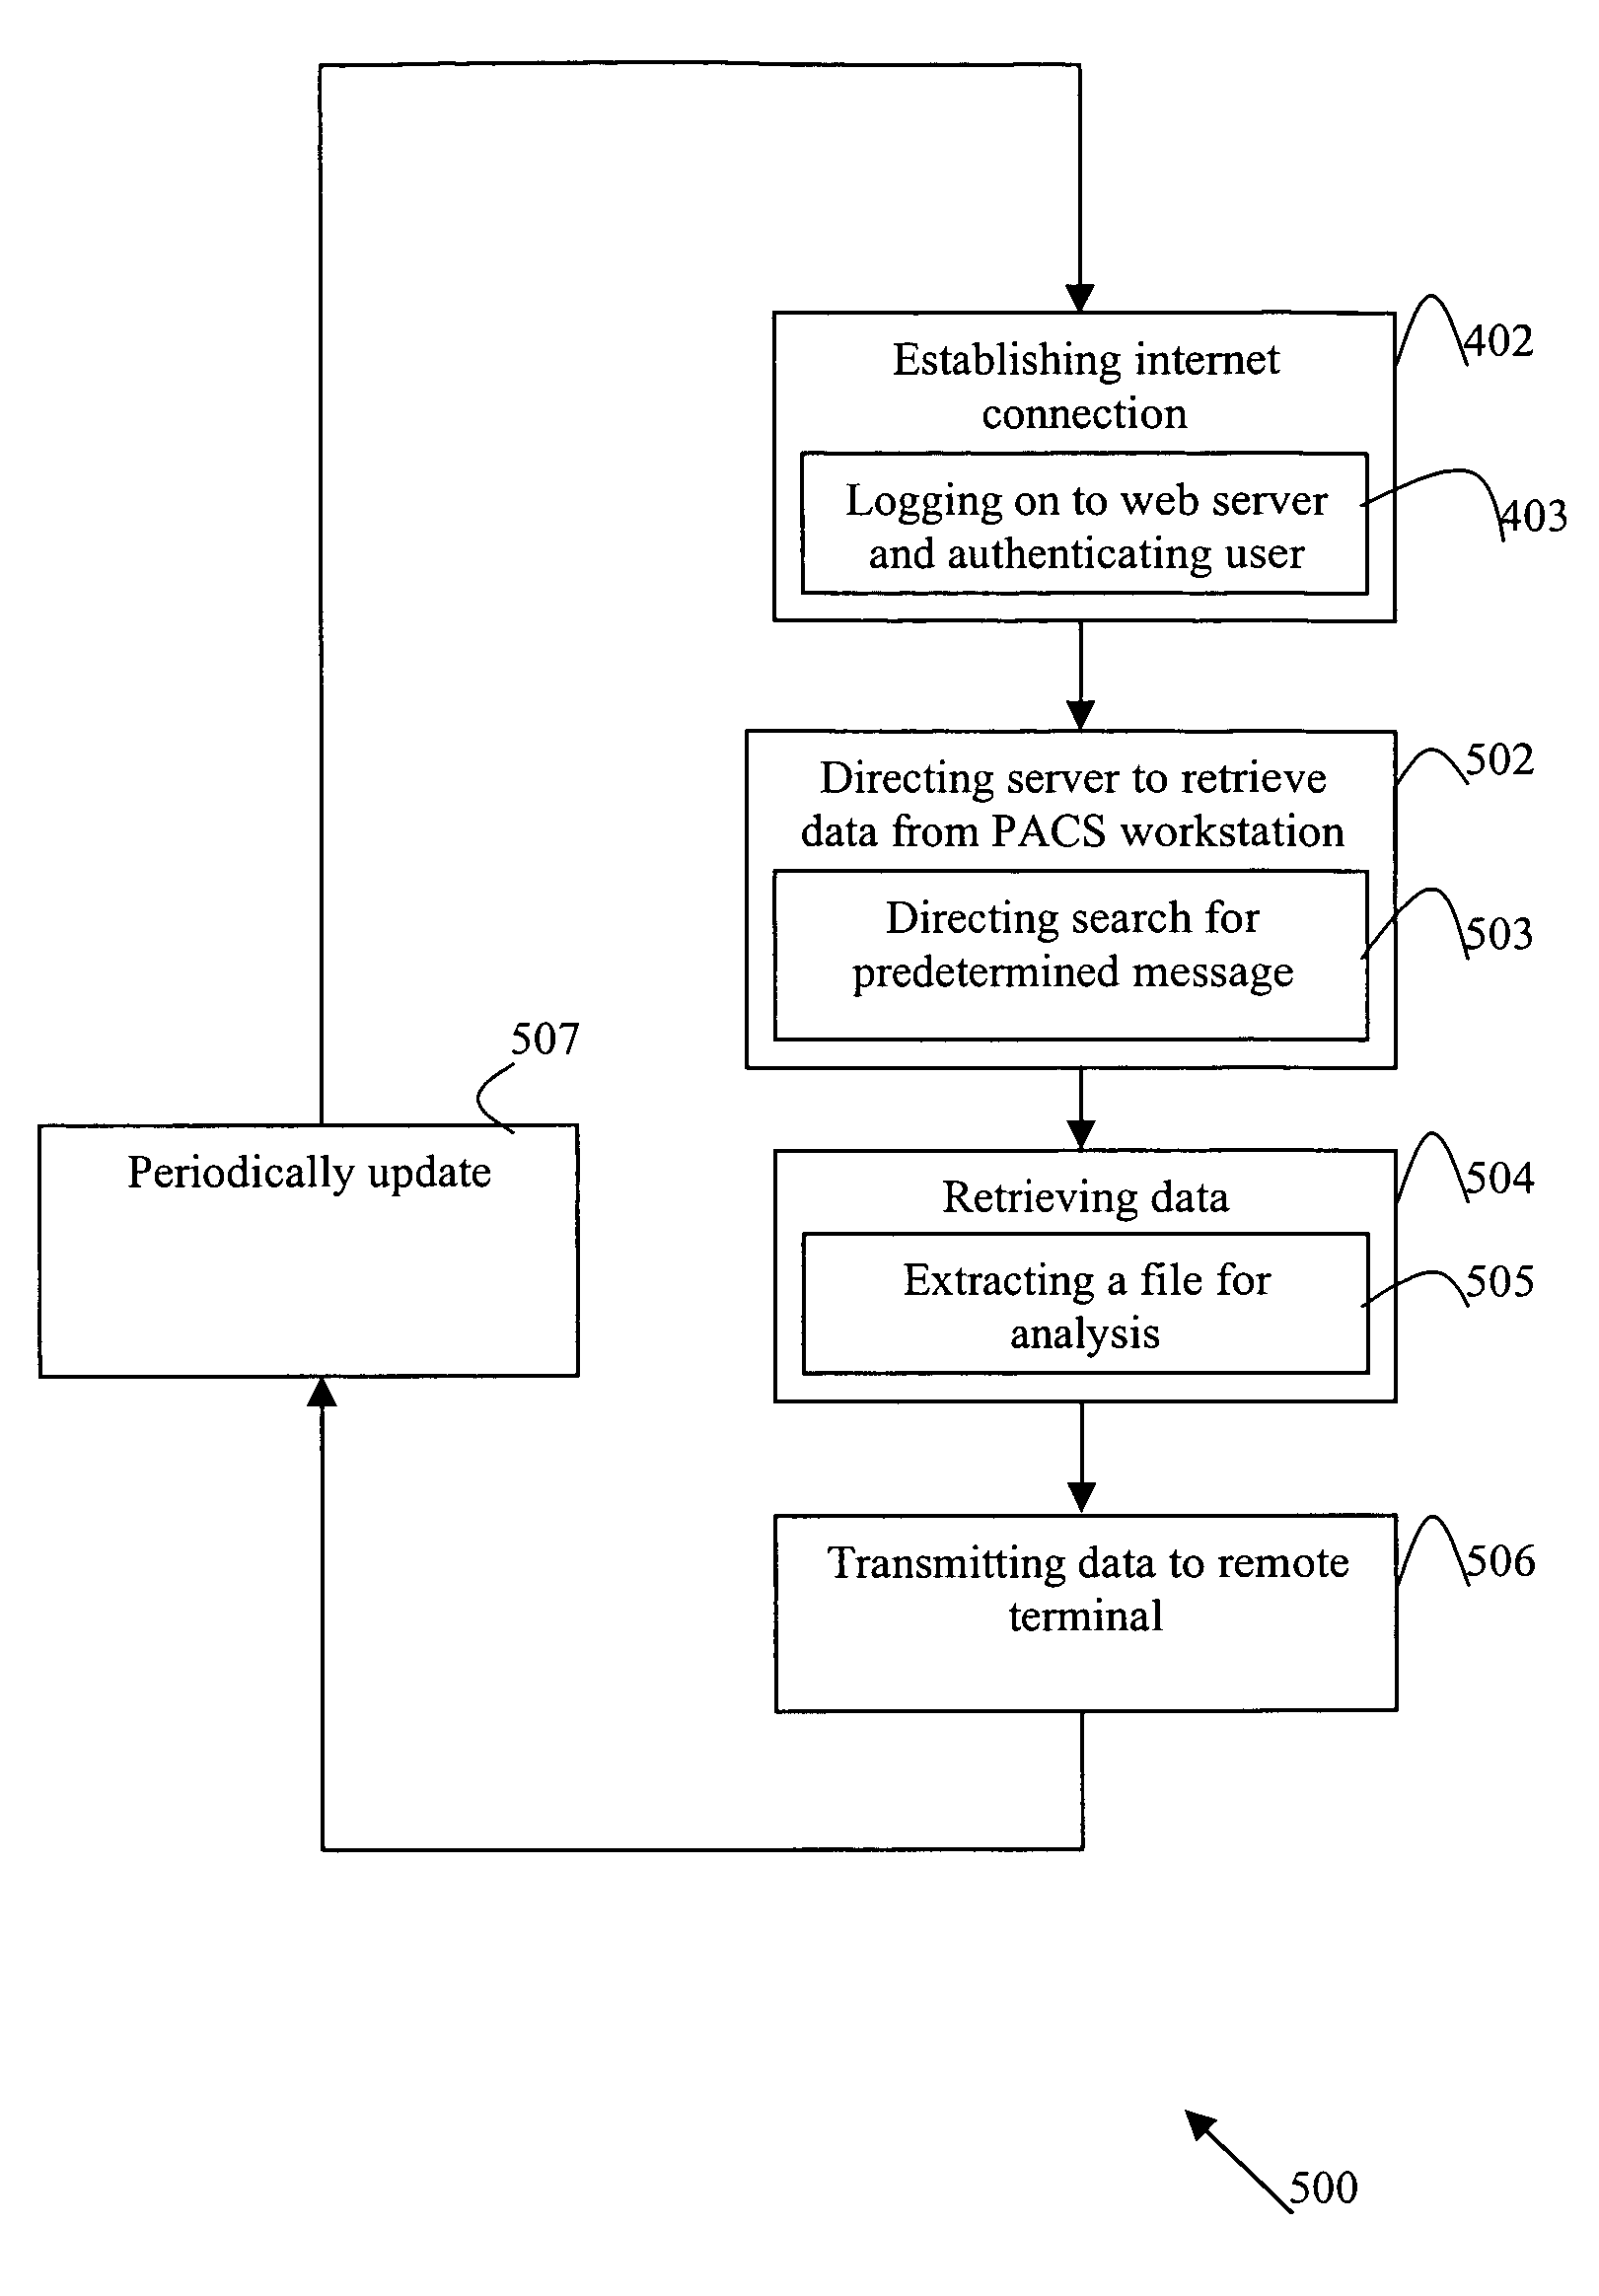 Web-based apparatus and method for enhancing and monitoring picture archiving and communication systems